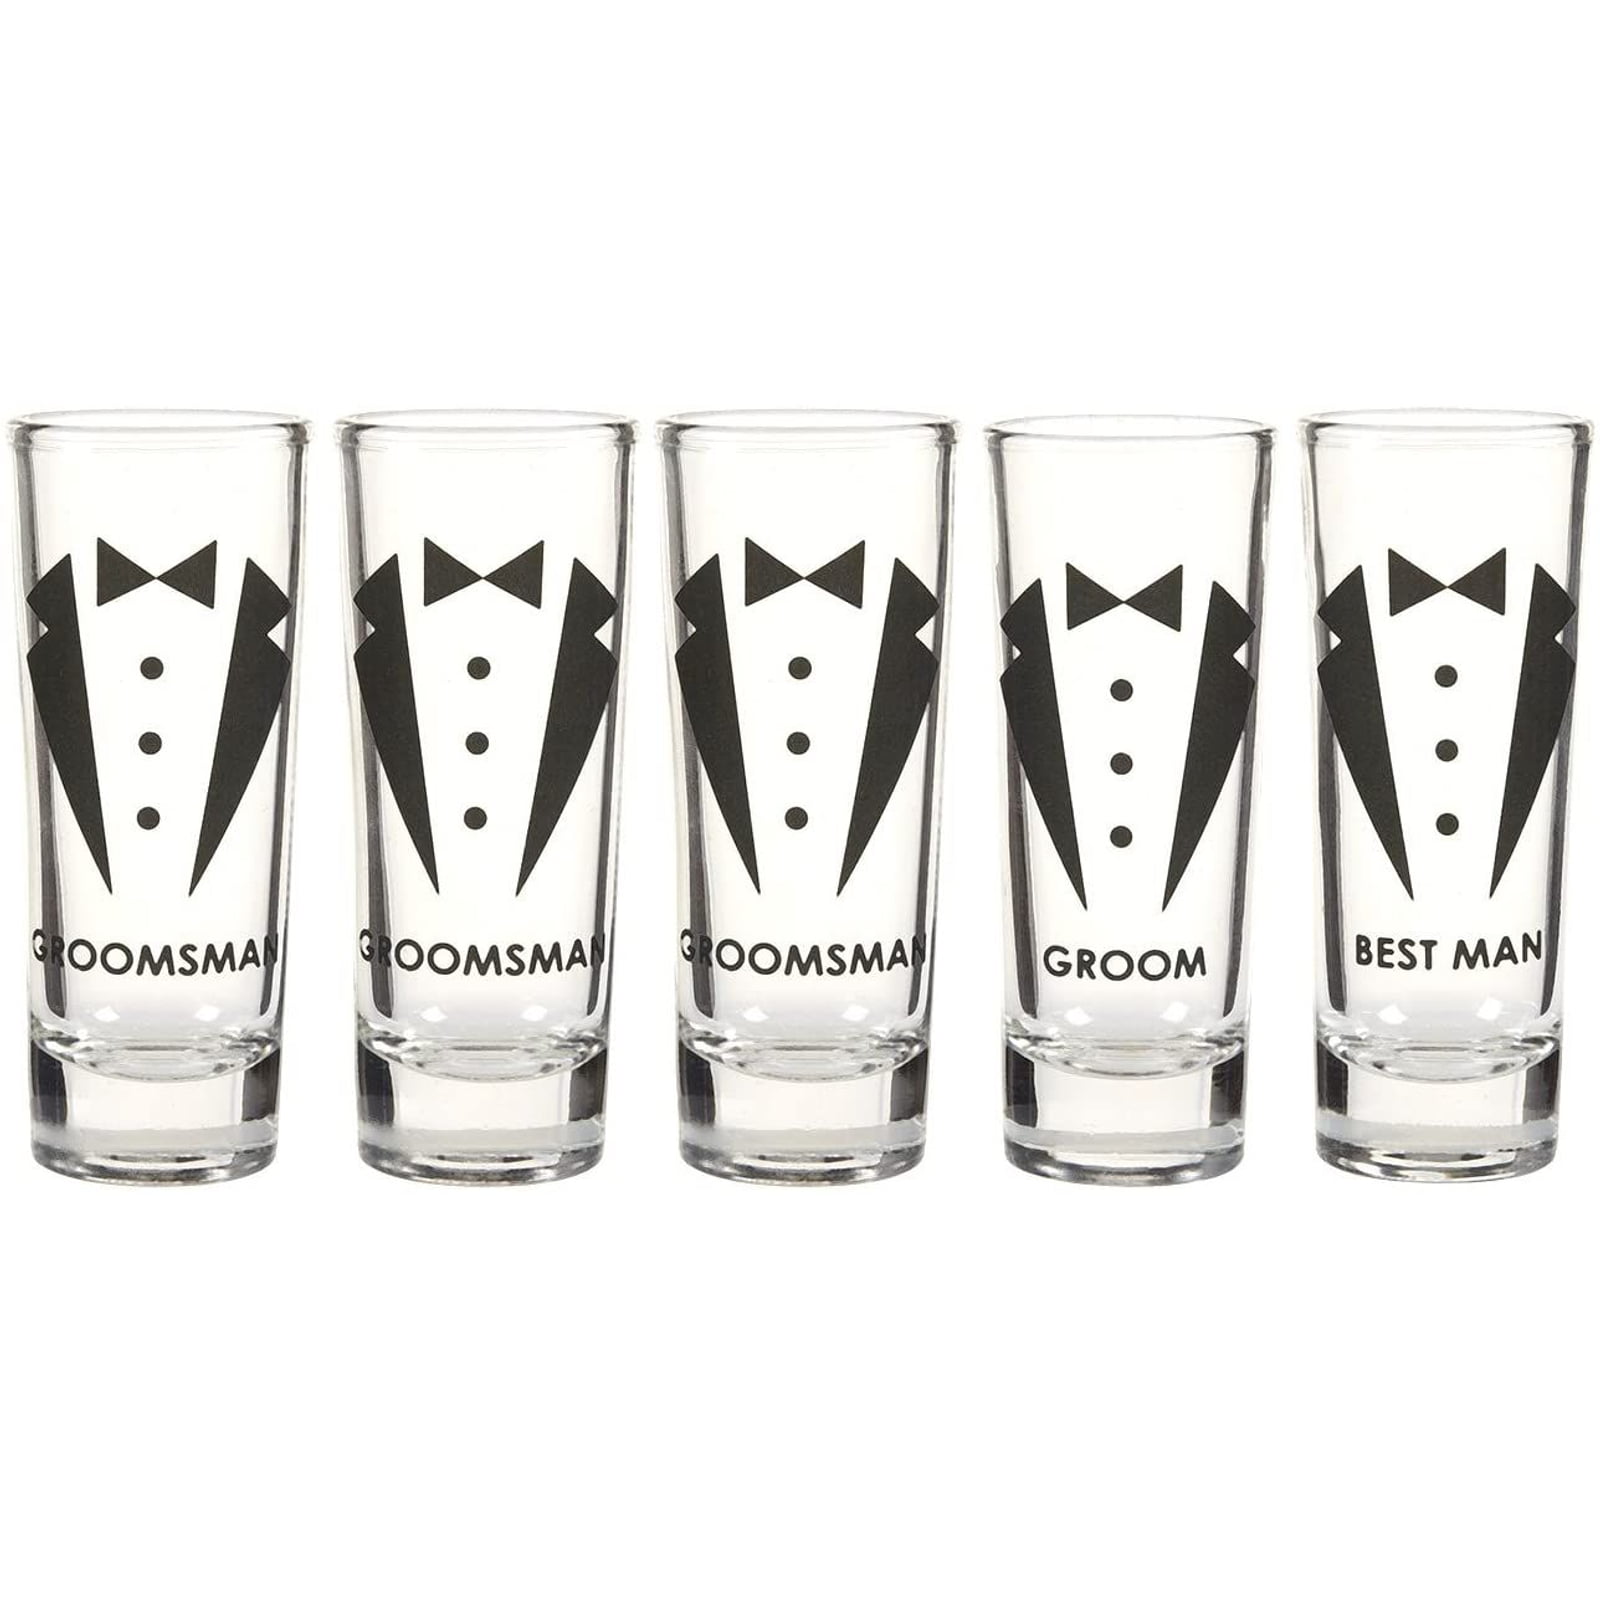 Details about   Bachelor Party Shot Glasses Glass Favors 40042 Groom Rhymes With Doom